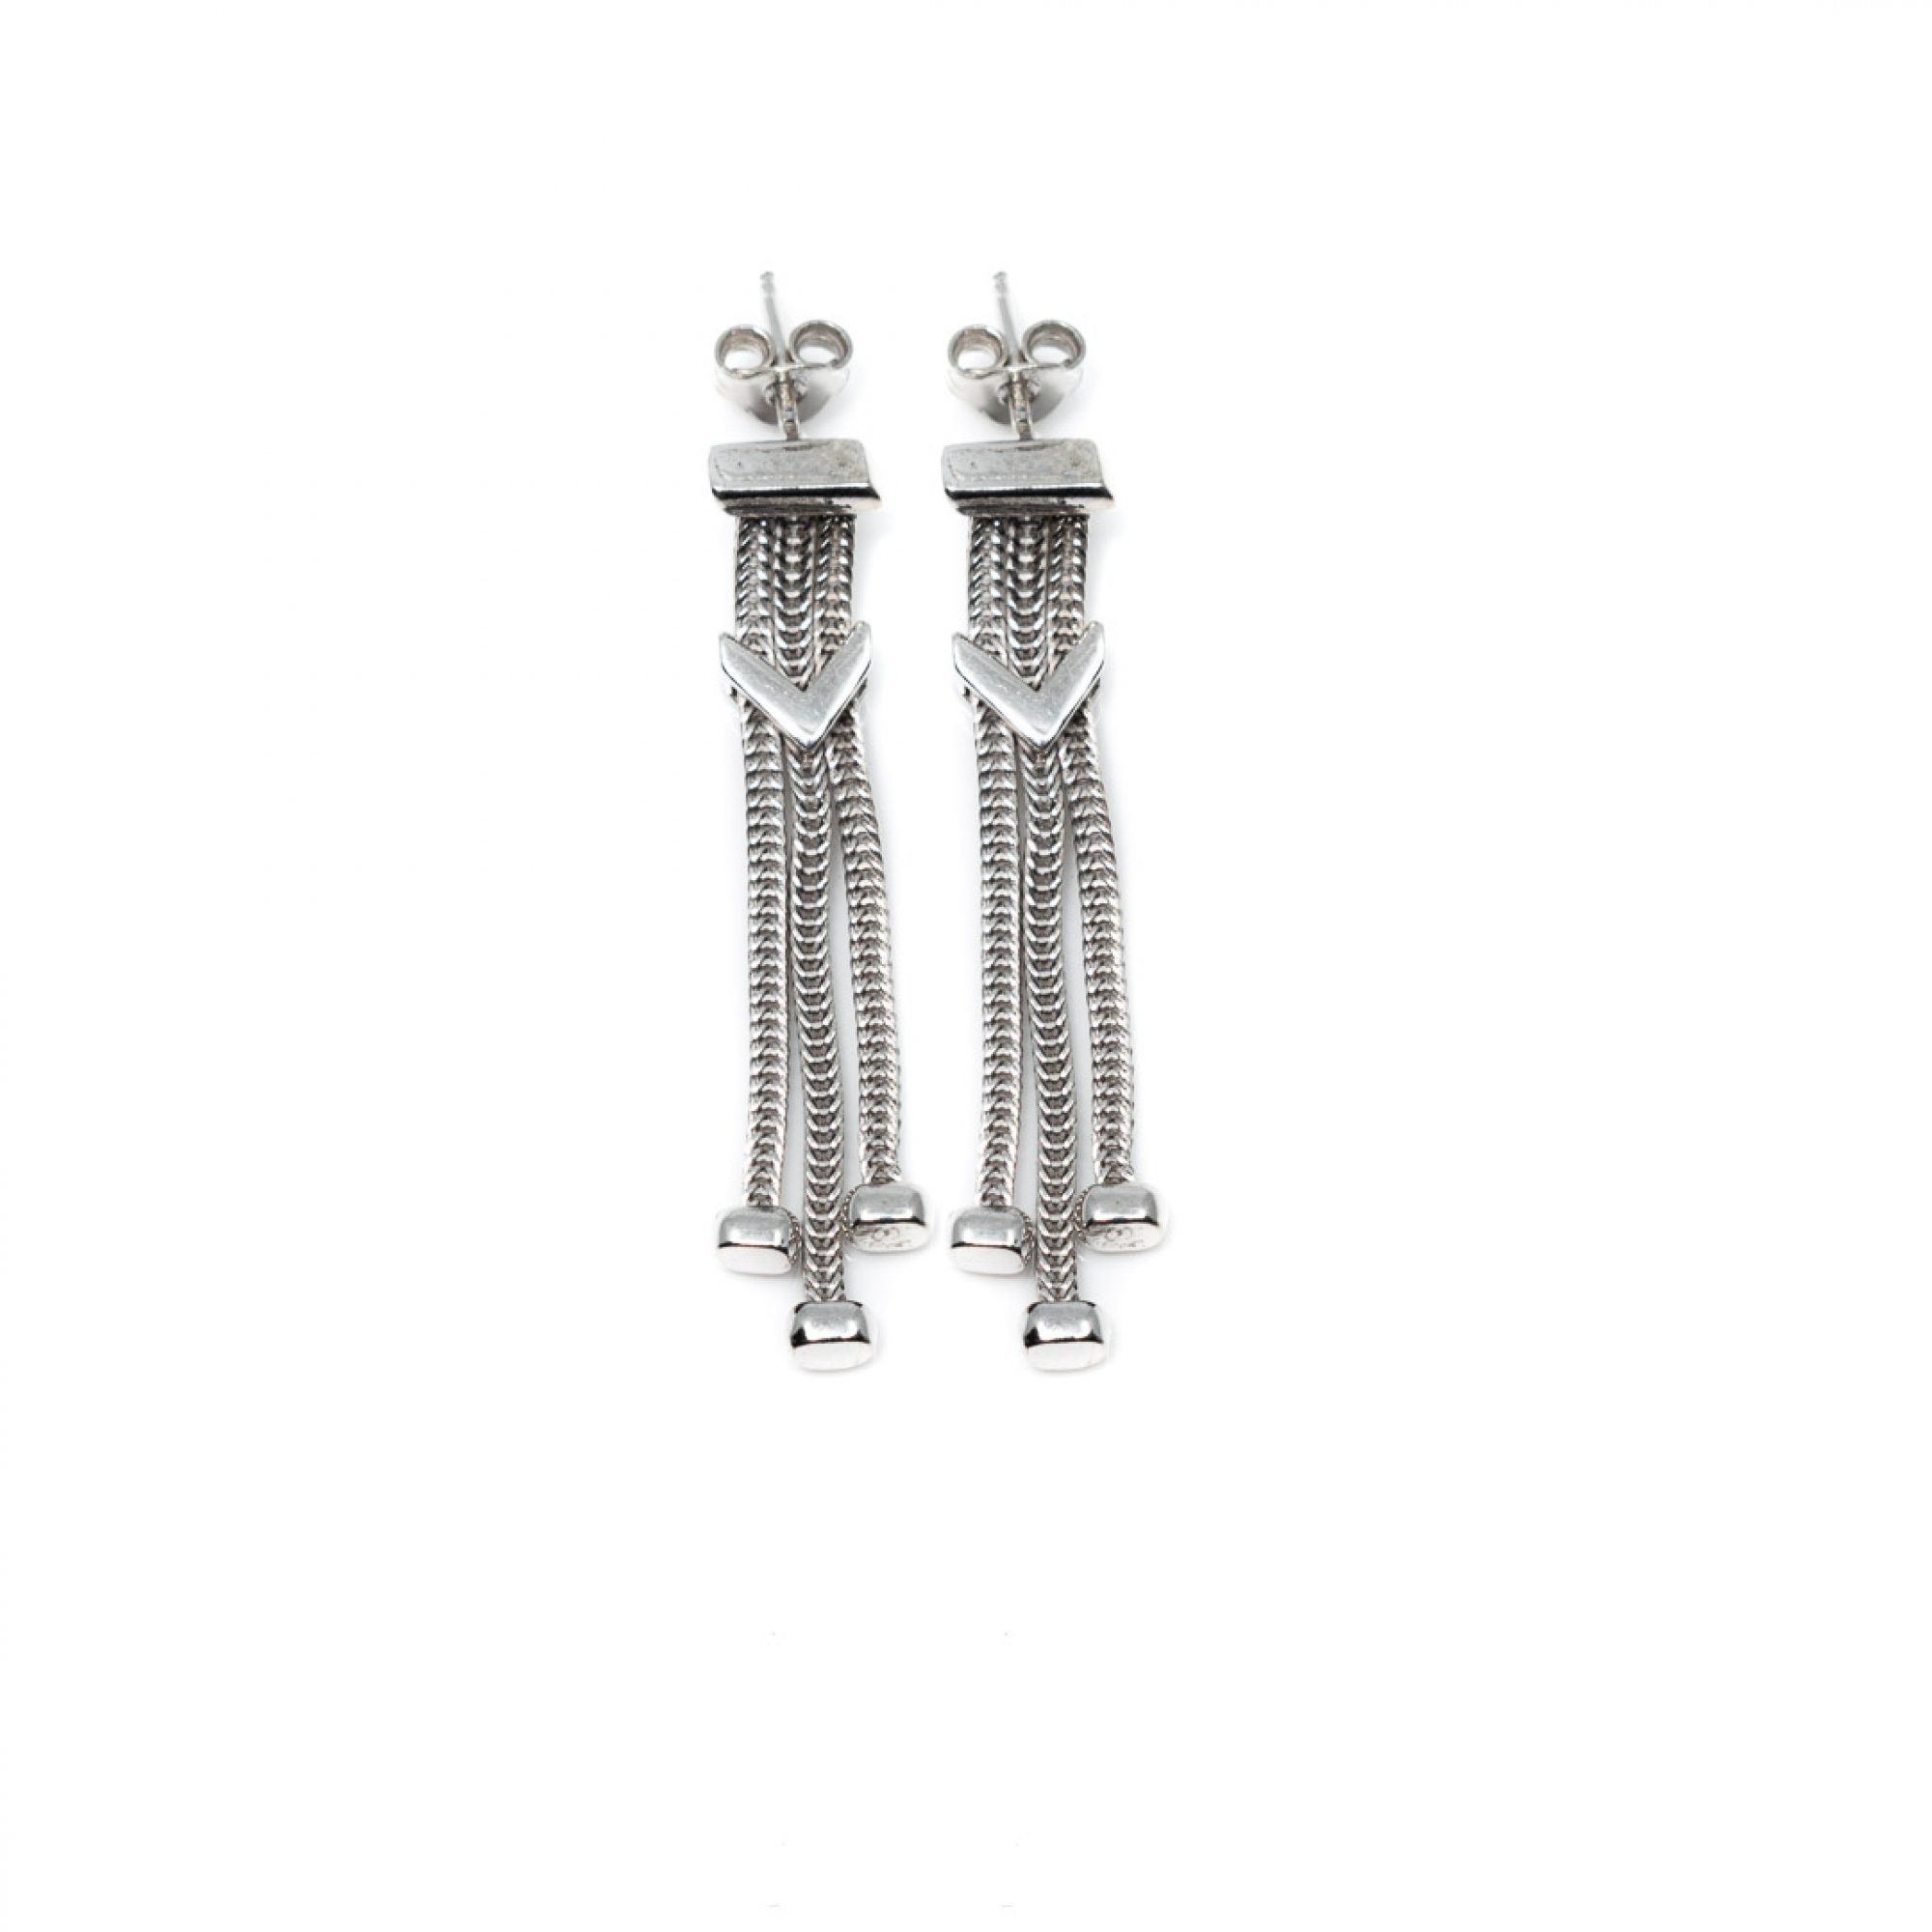 Chain earrings platinum plated